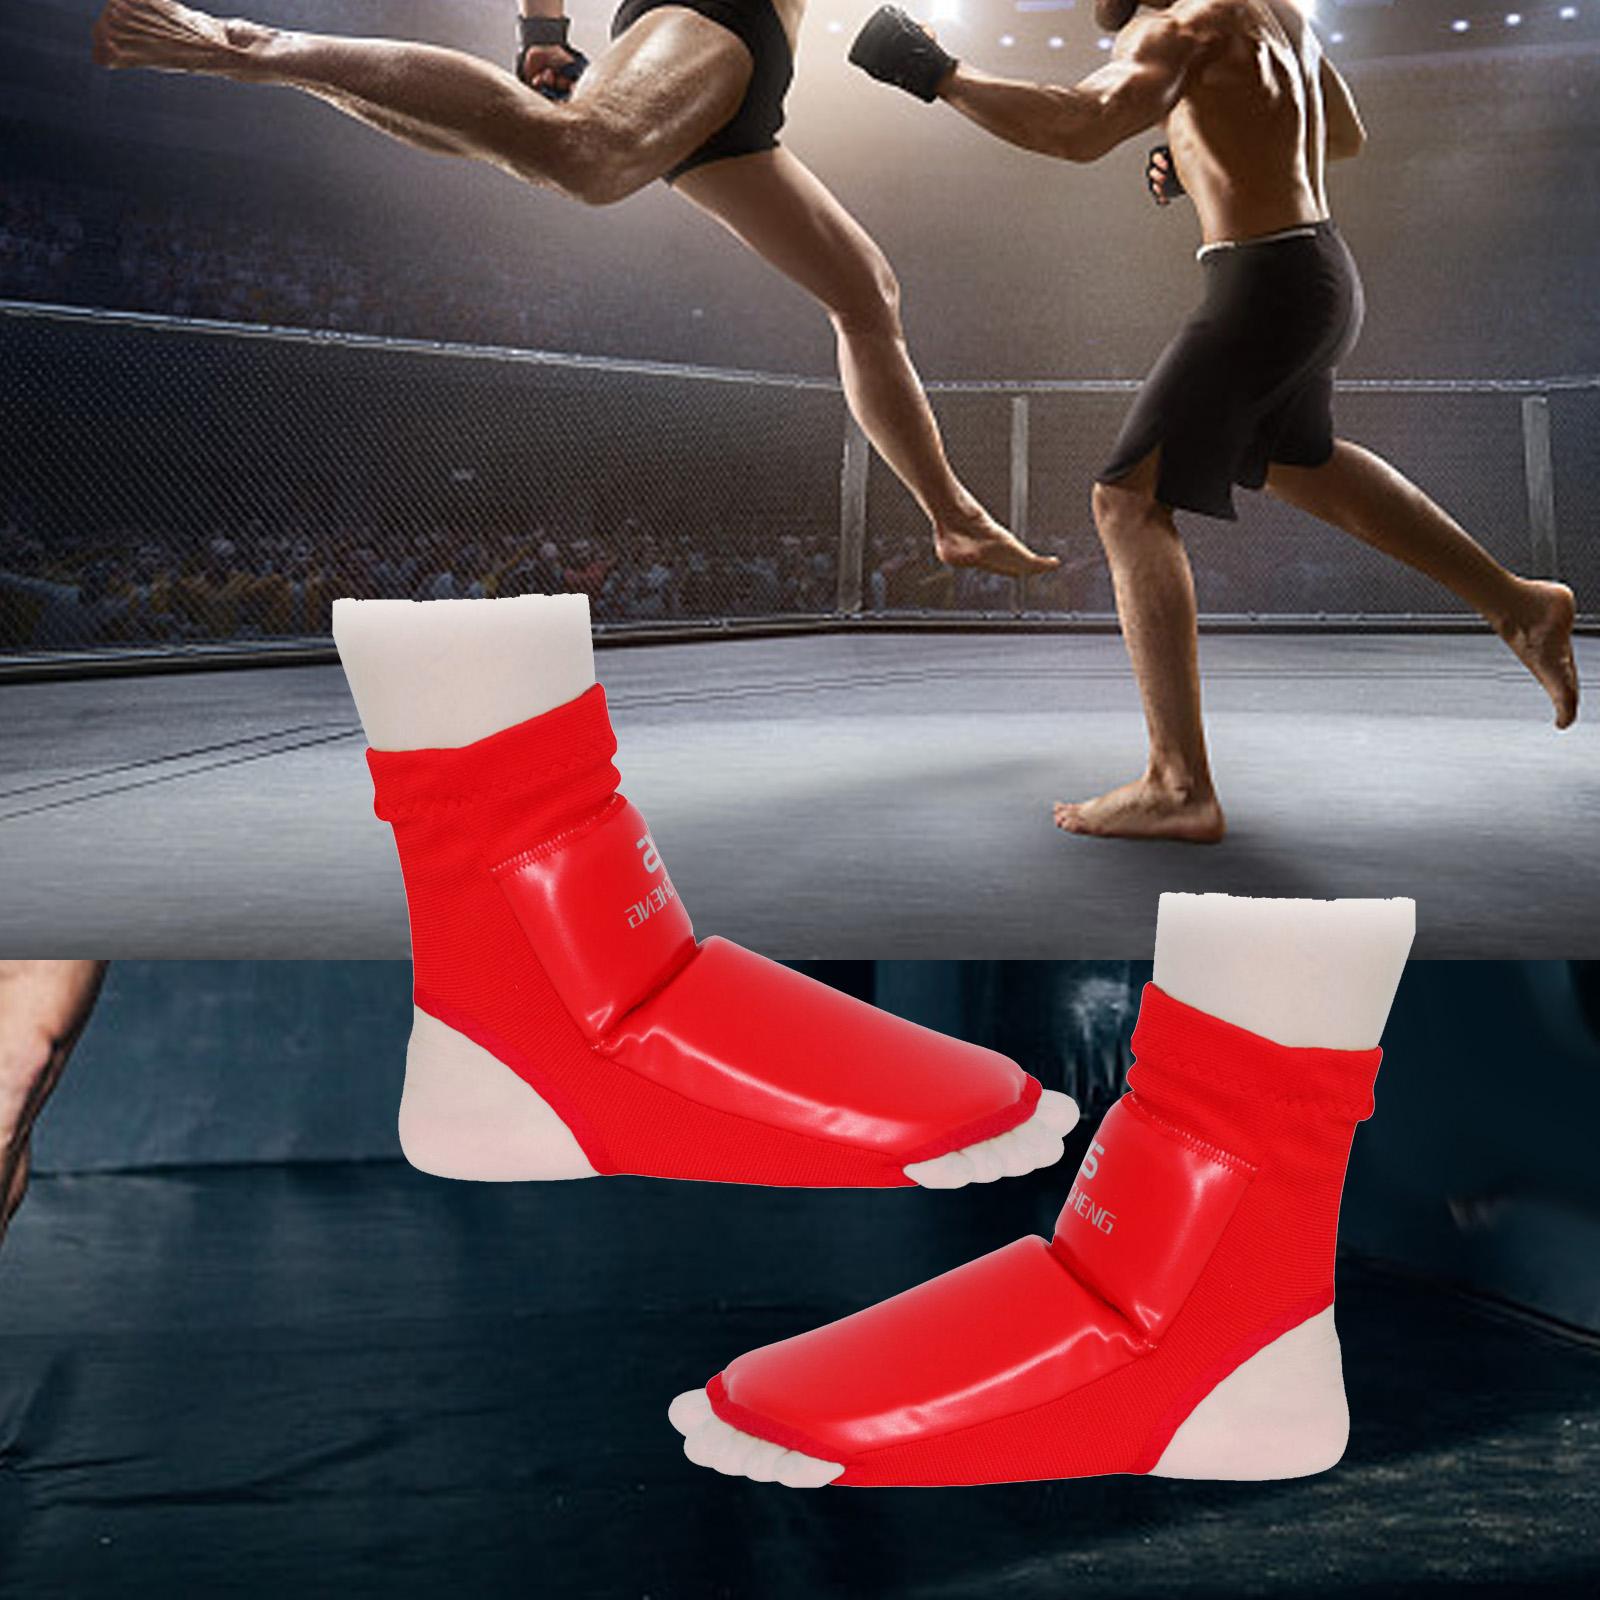 Instep Guard Protective Gear Foot Protector for Kids Adults Boxing Taekwondo XL